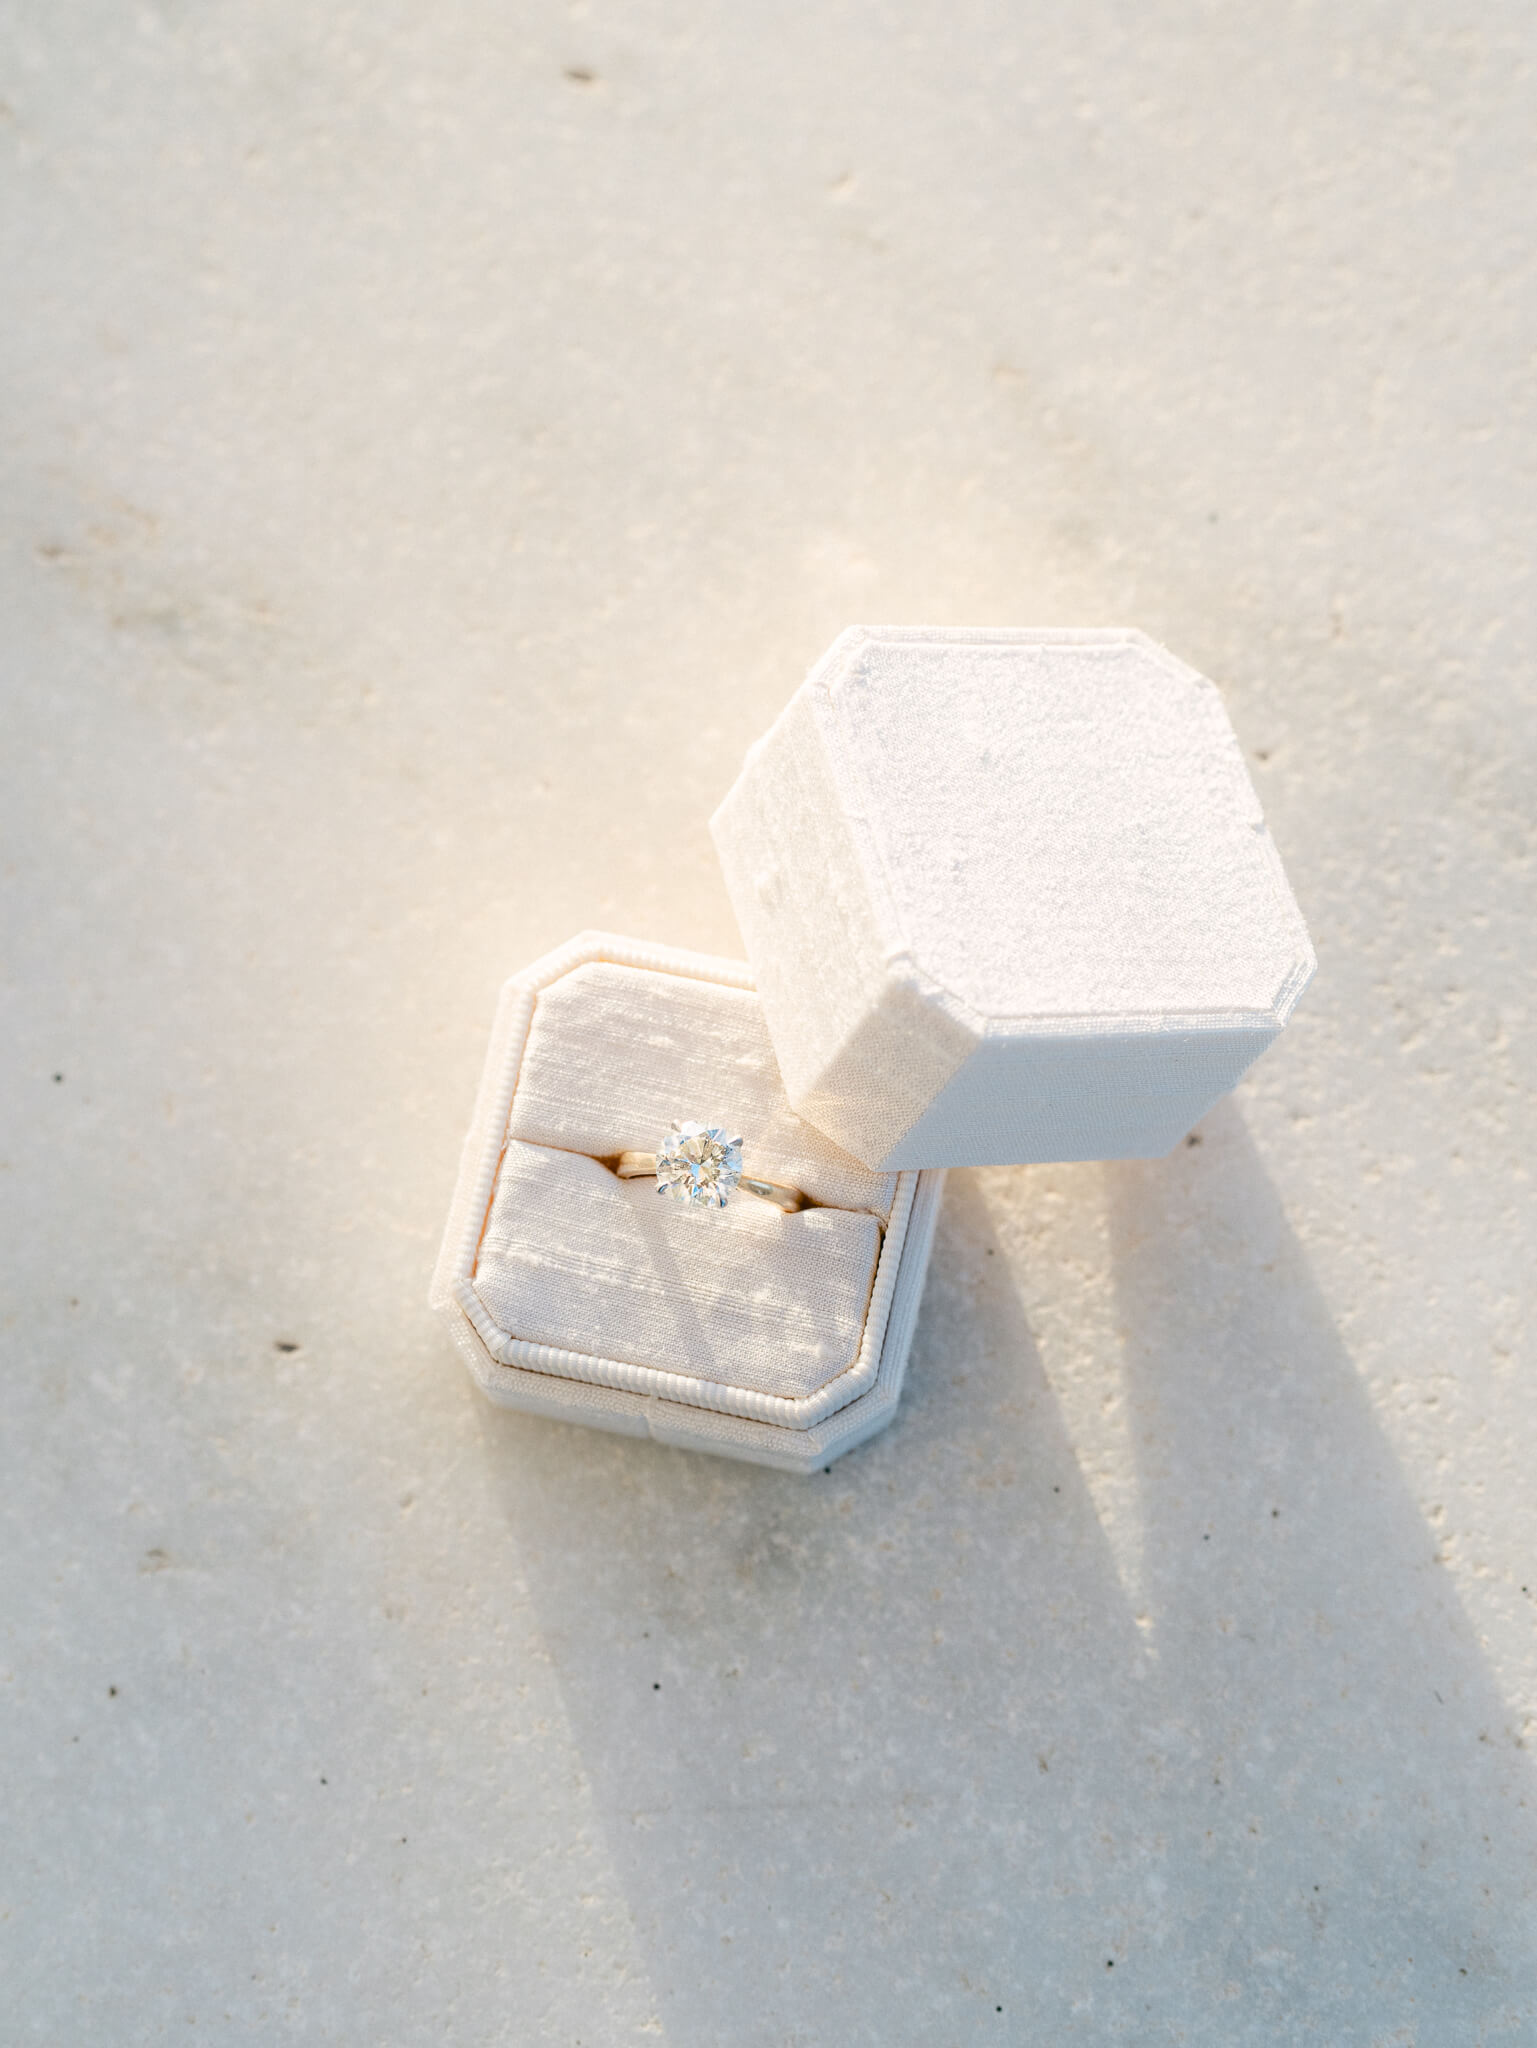 Closeup of an engagement ring in a white ring box.